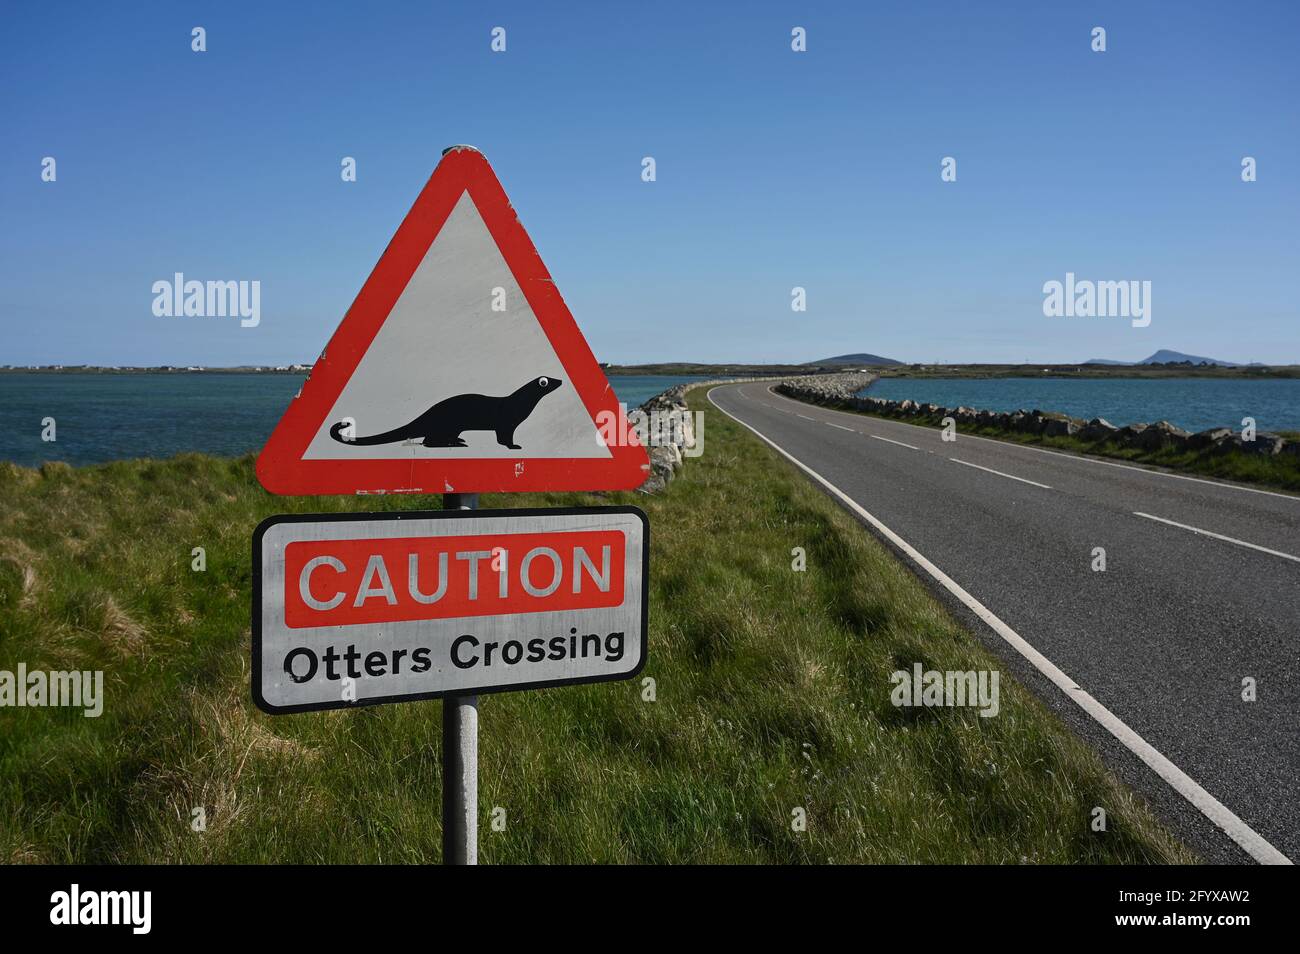 Caution Otters Crossing sign, red warning triangle and otter icon. Blurred background of causeway, sea and grass. South Uist to Benbecula causeway. Stock Photo